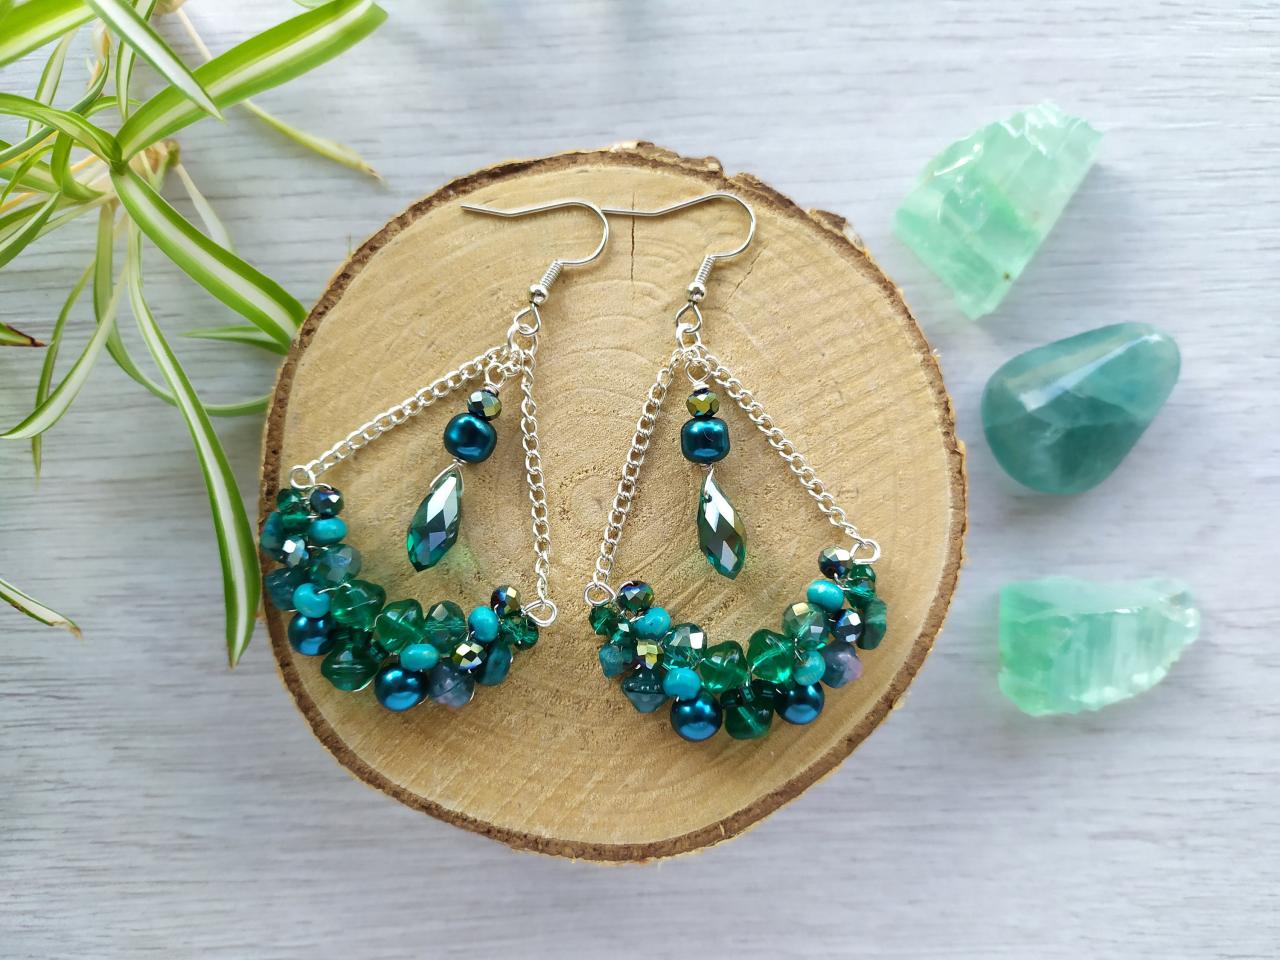 Teal Bubbly Swings, Wire Wrapped Silver And Blue Green Bohemian Earrings With Chrysocolla, Teal Silver Chandelier Earrings.